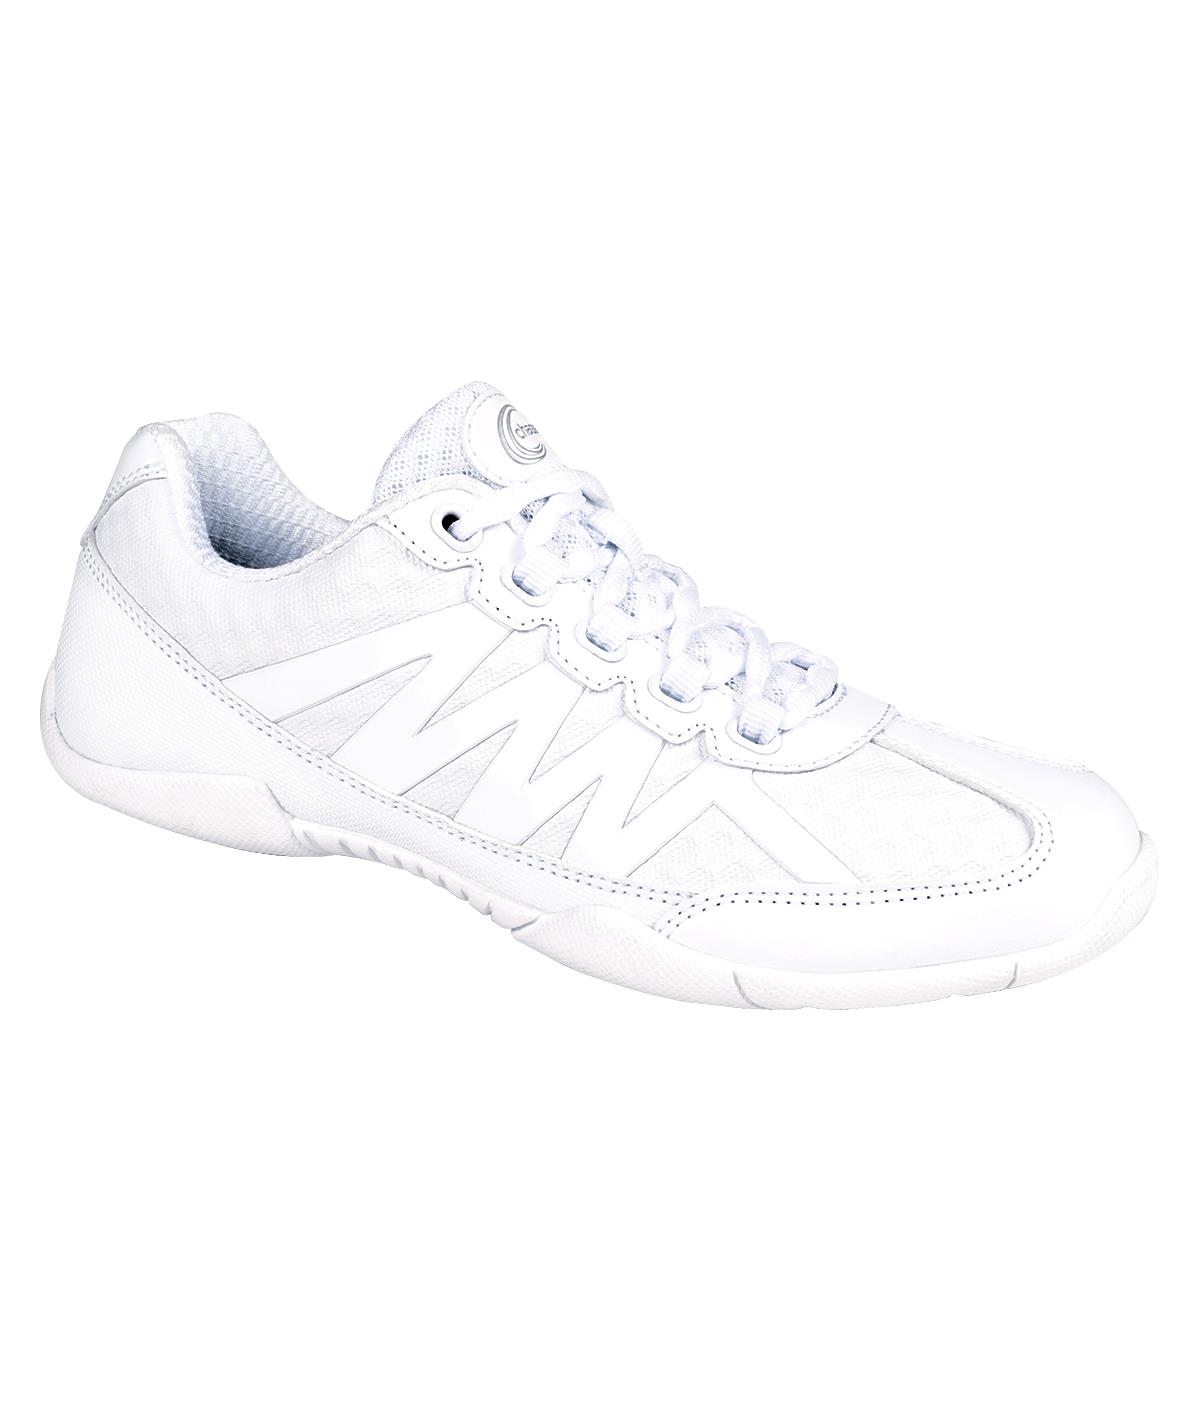 Chasse Cheer Shoes White Pulse Size 7 Athletic Shoes | eBay